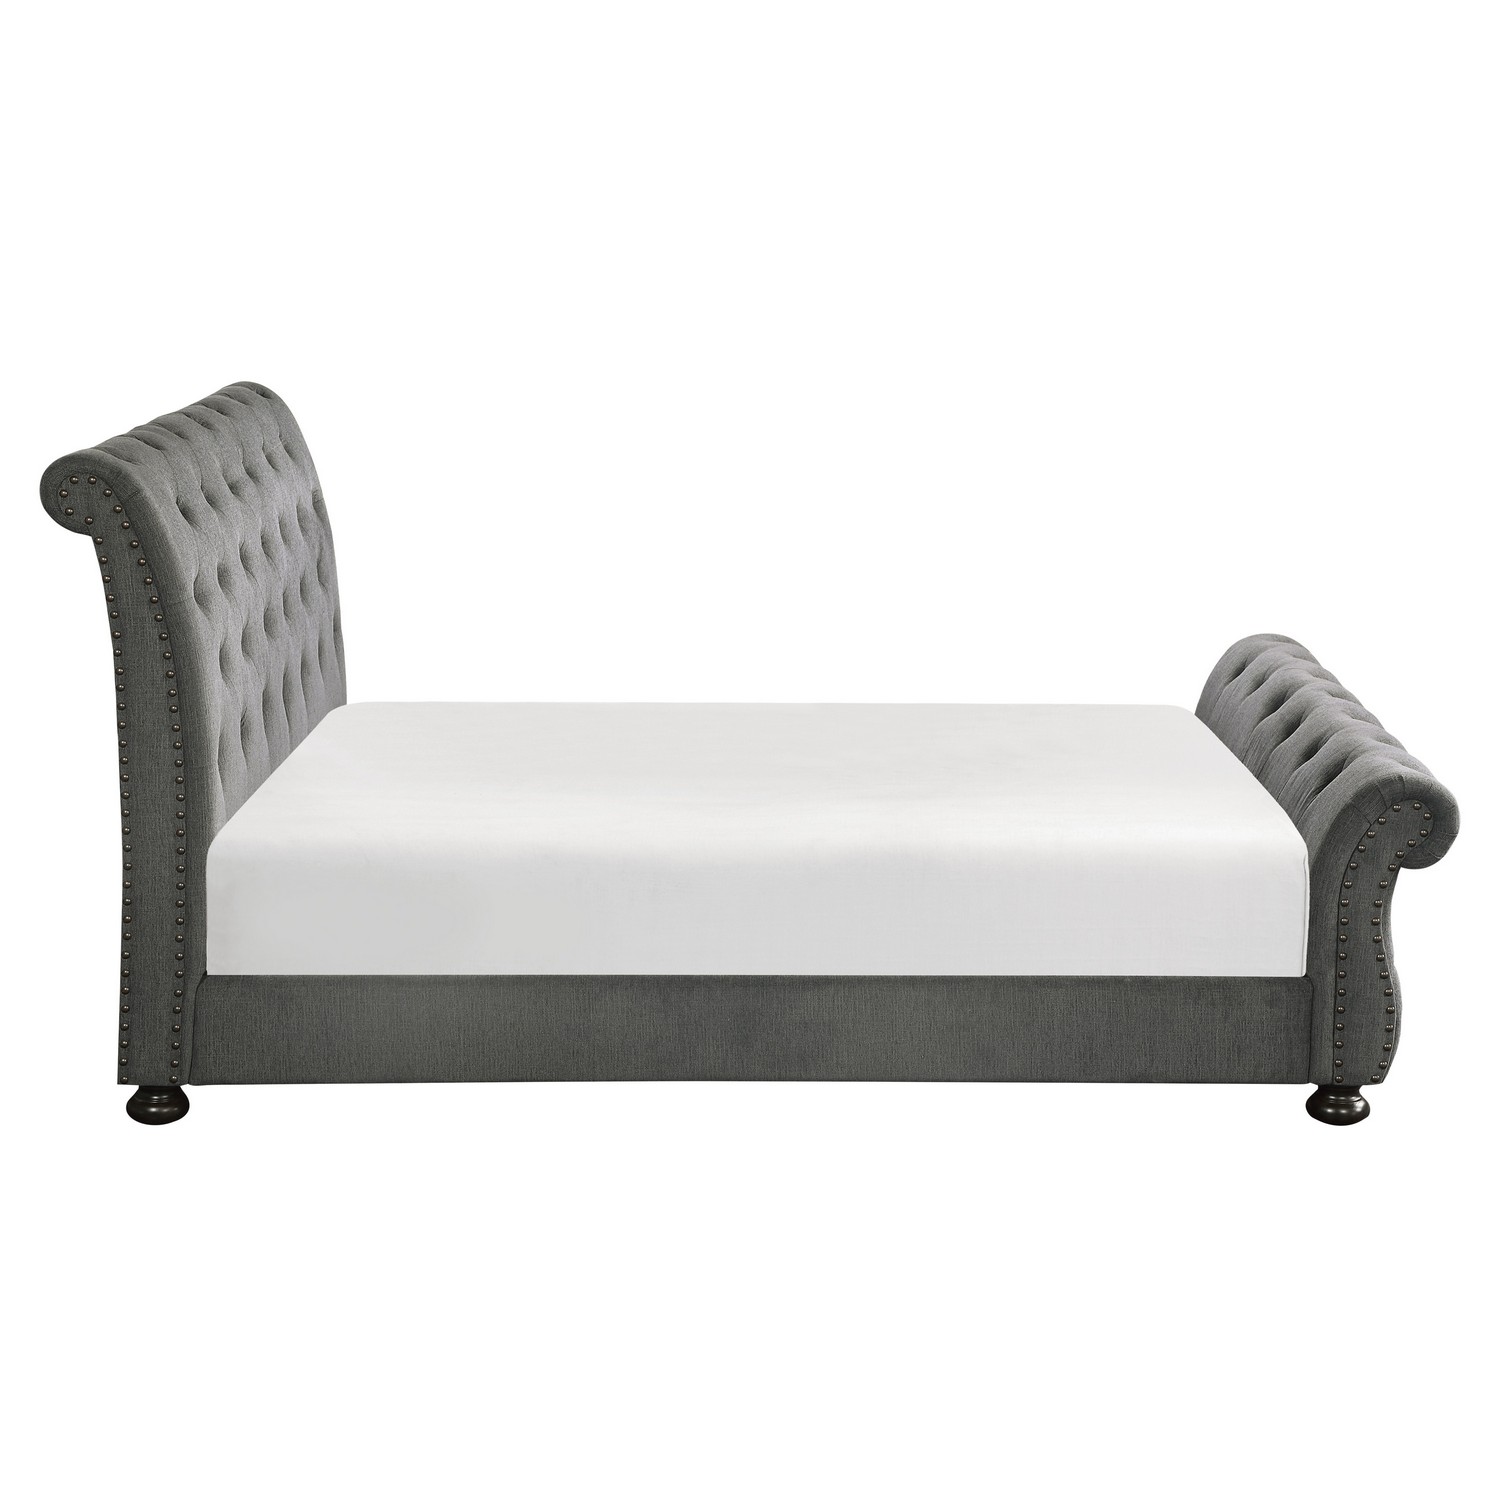 Homelegance Crofton Tufted Bed - Gray